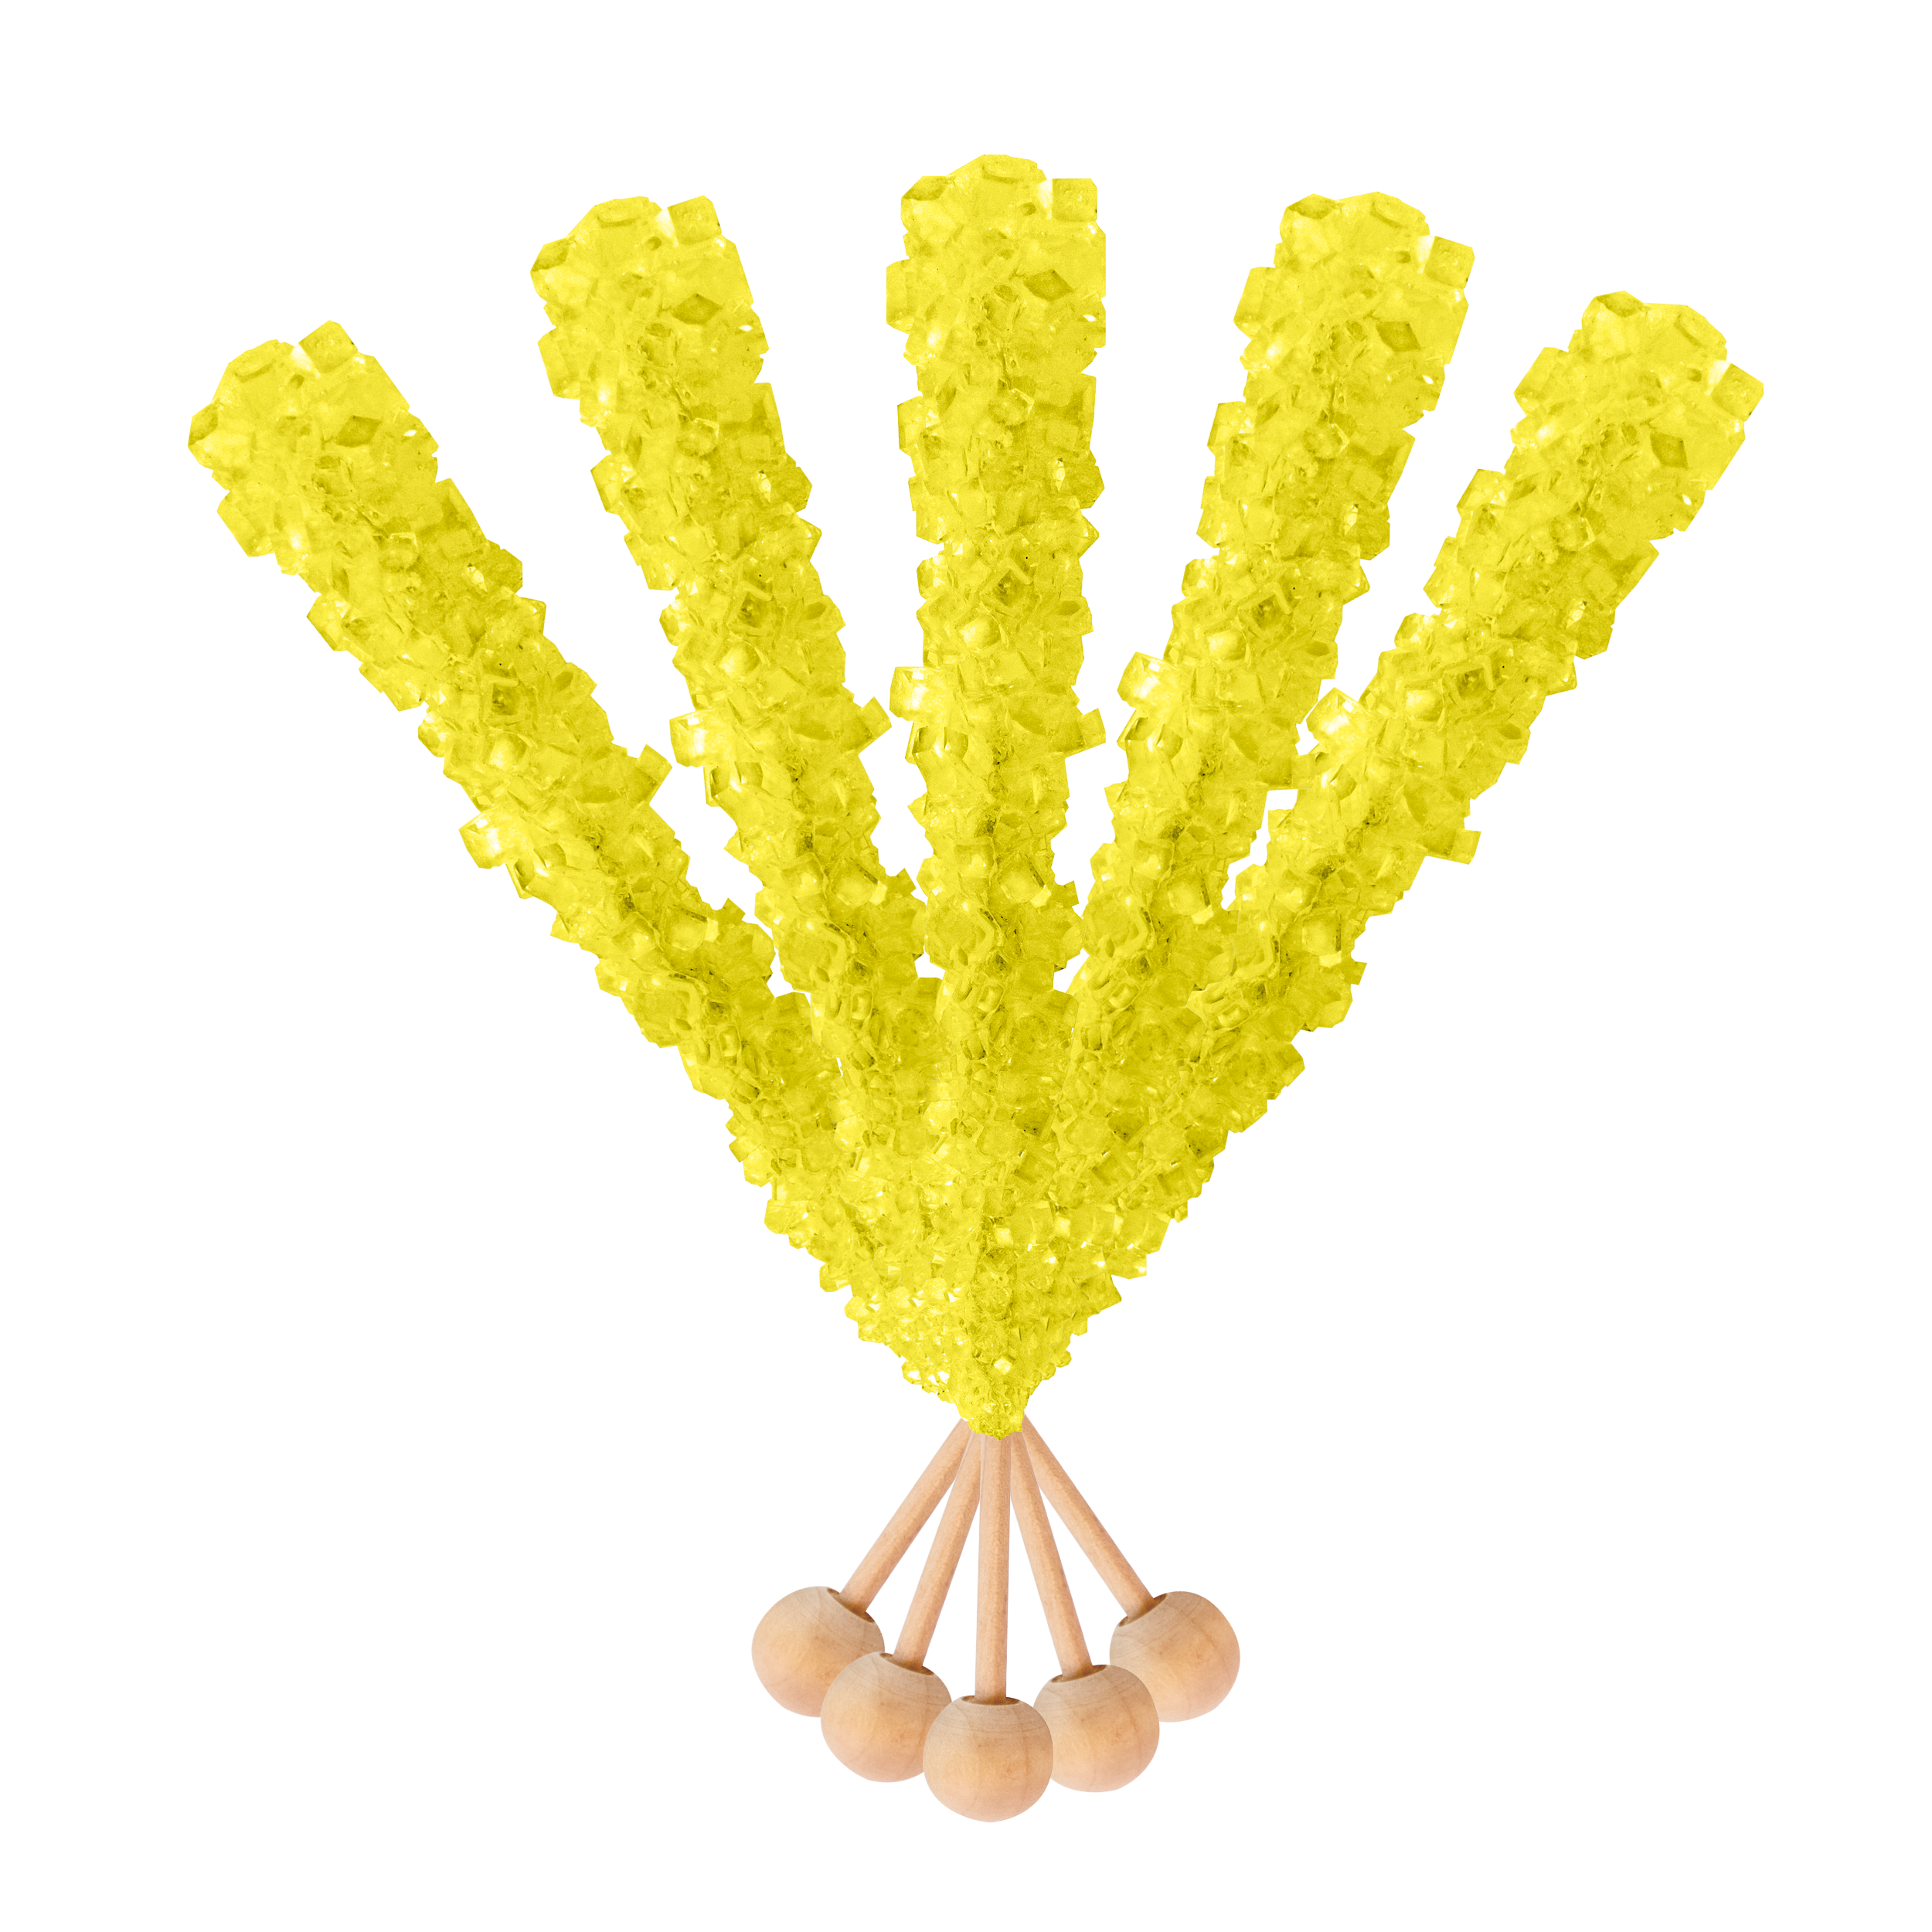 Yellow/Pineapple Rock Crystal Candy